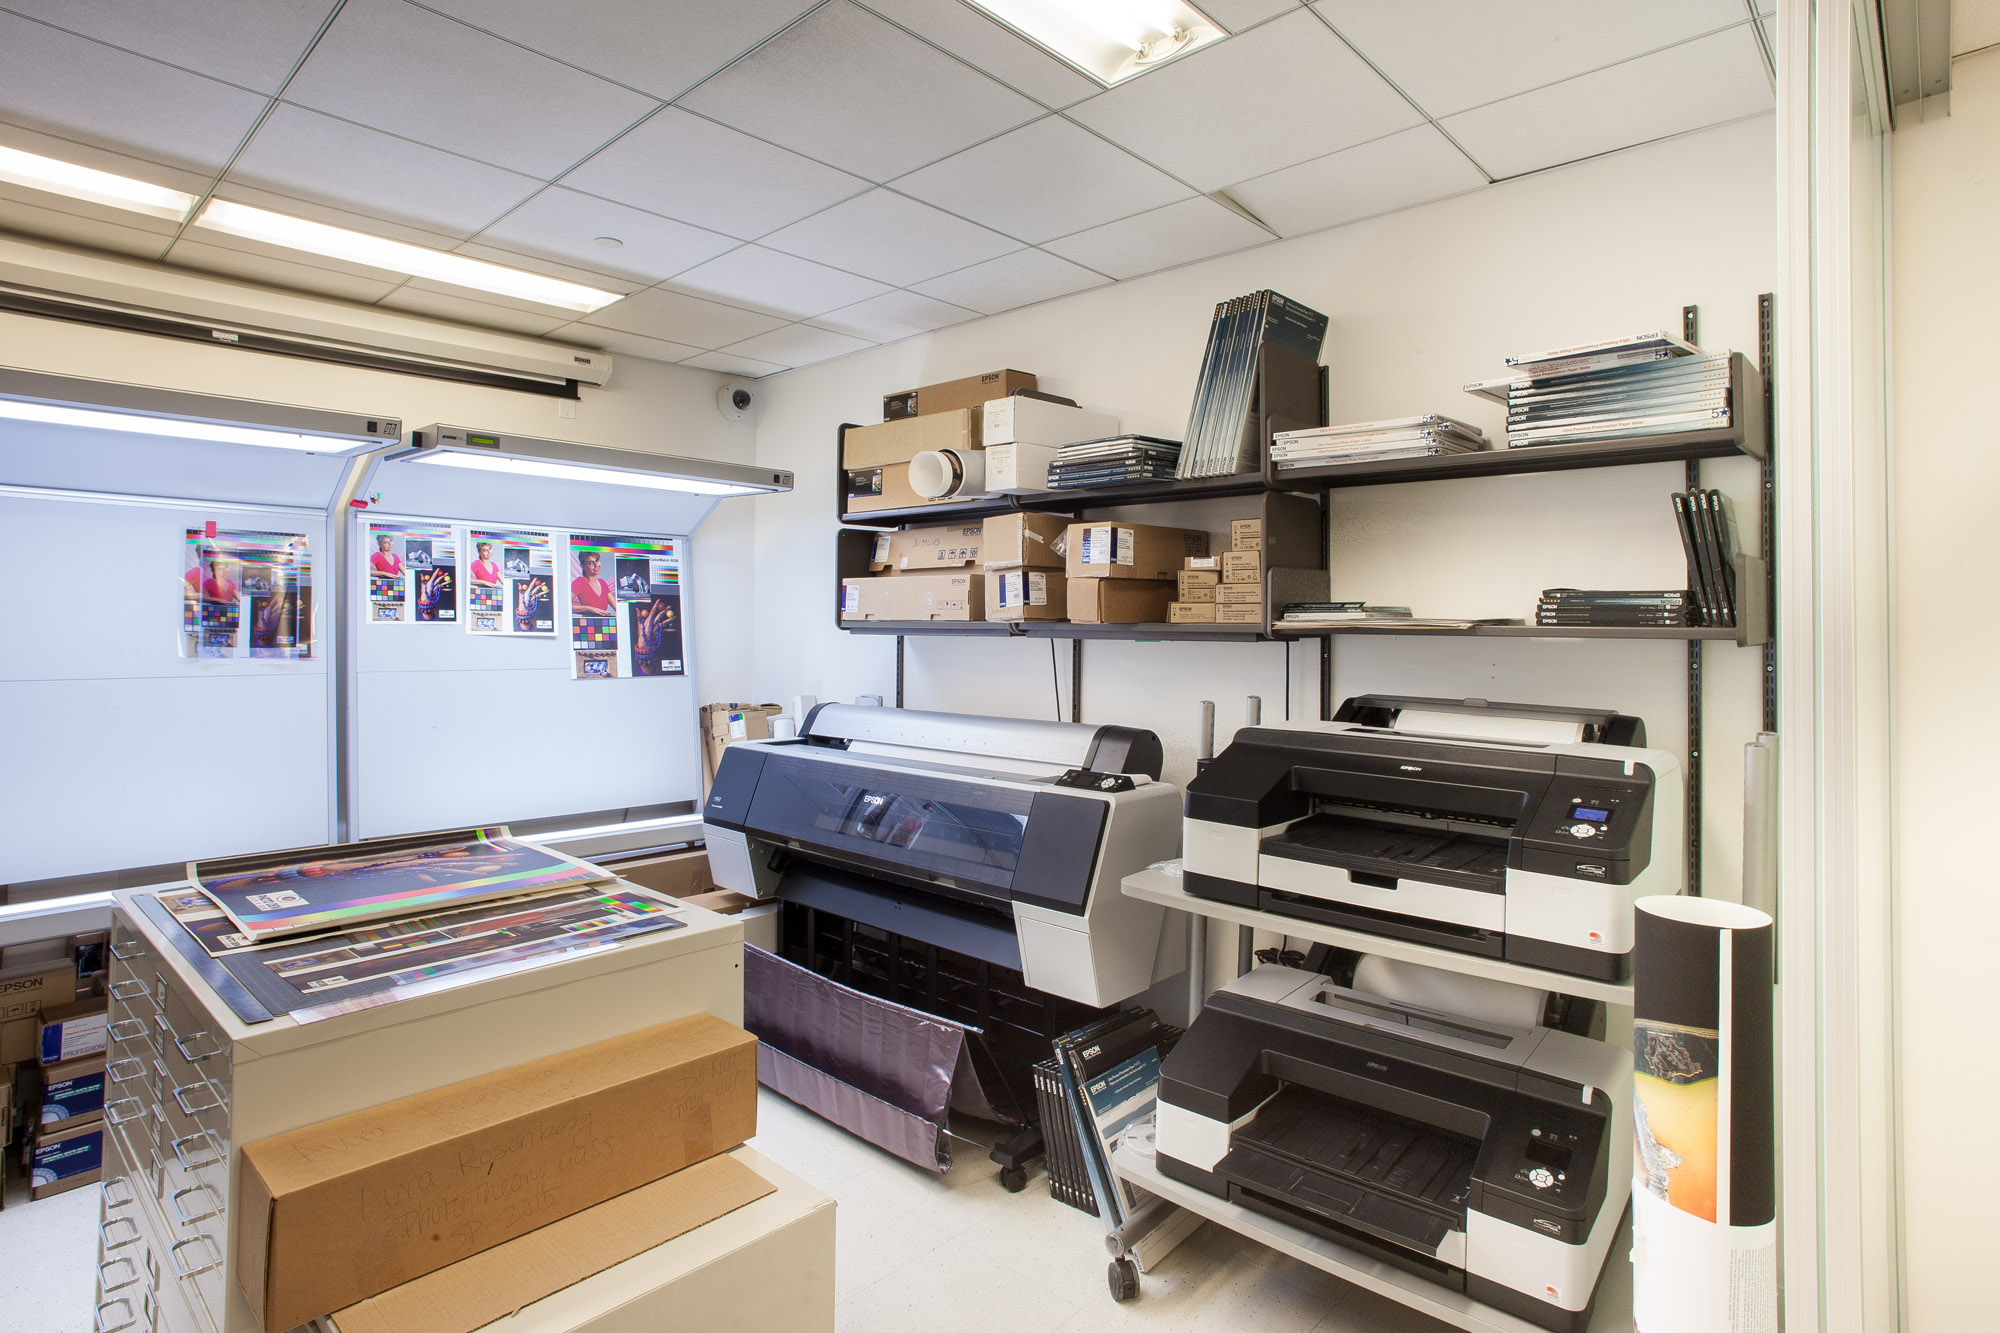 Print room with several prints on the wall in the background and a big printer and several smaller printers.